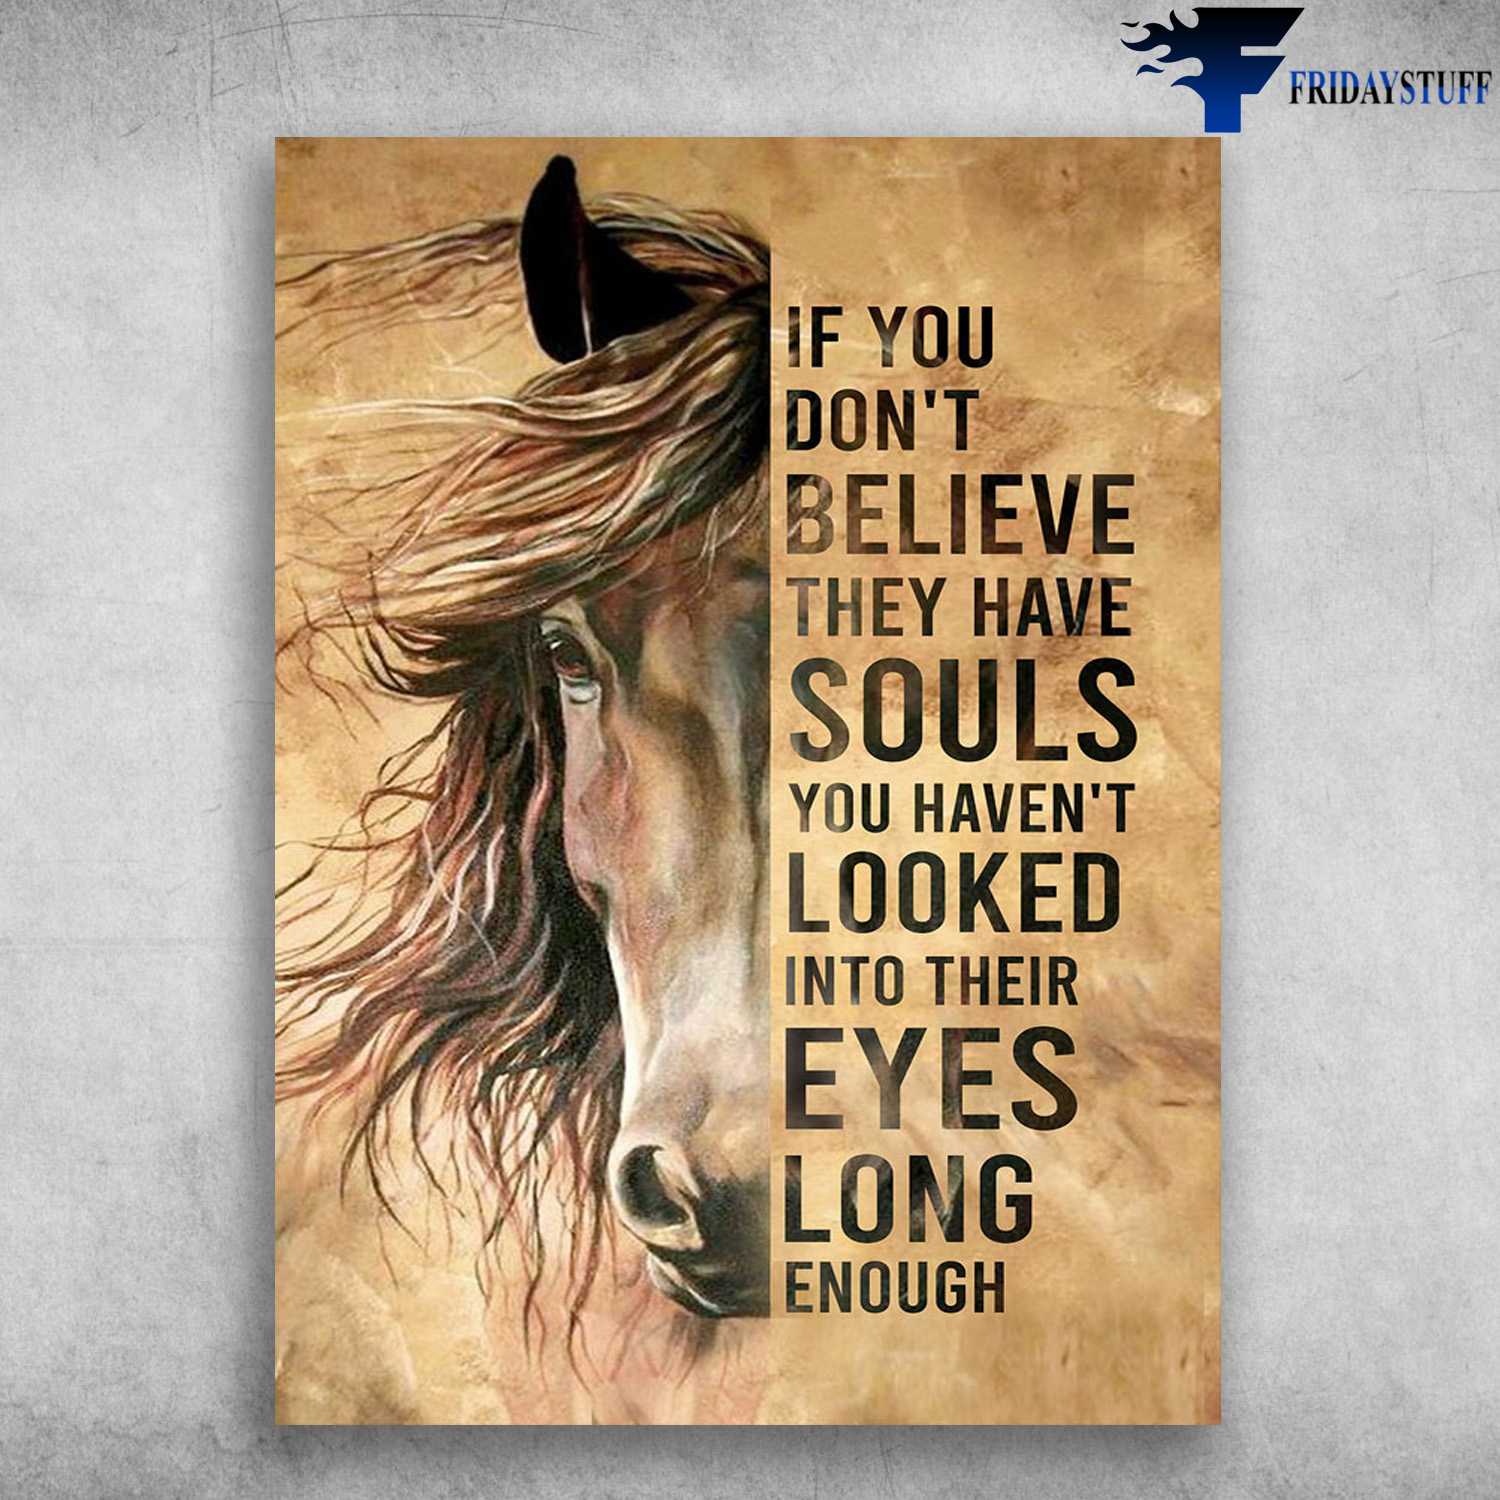 Horse Poster - If You Don't Believe, They Have Souls, You Haven't Looked, Into Their Eyes Long Enough